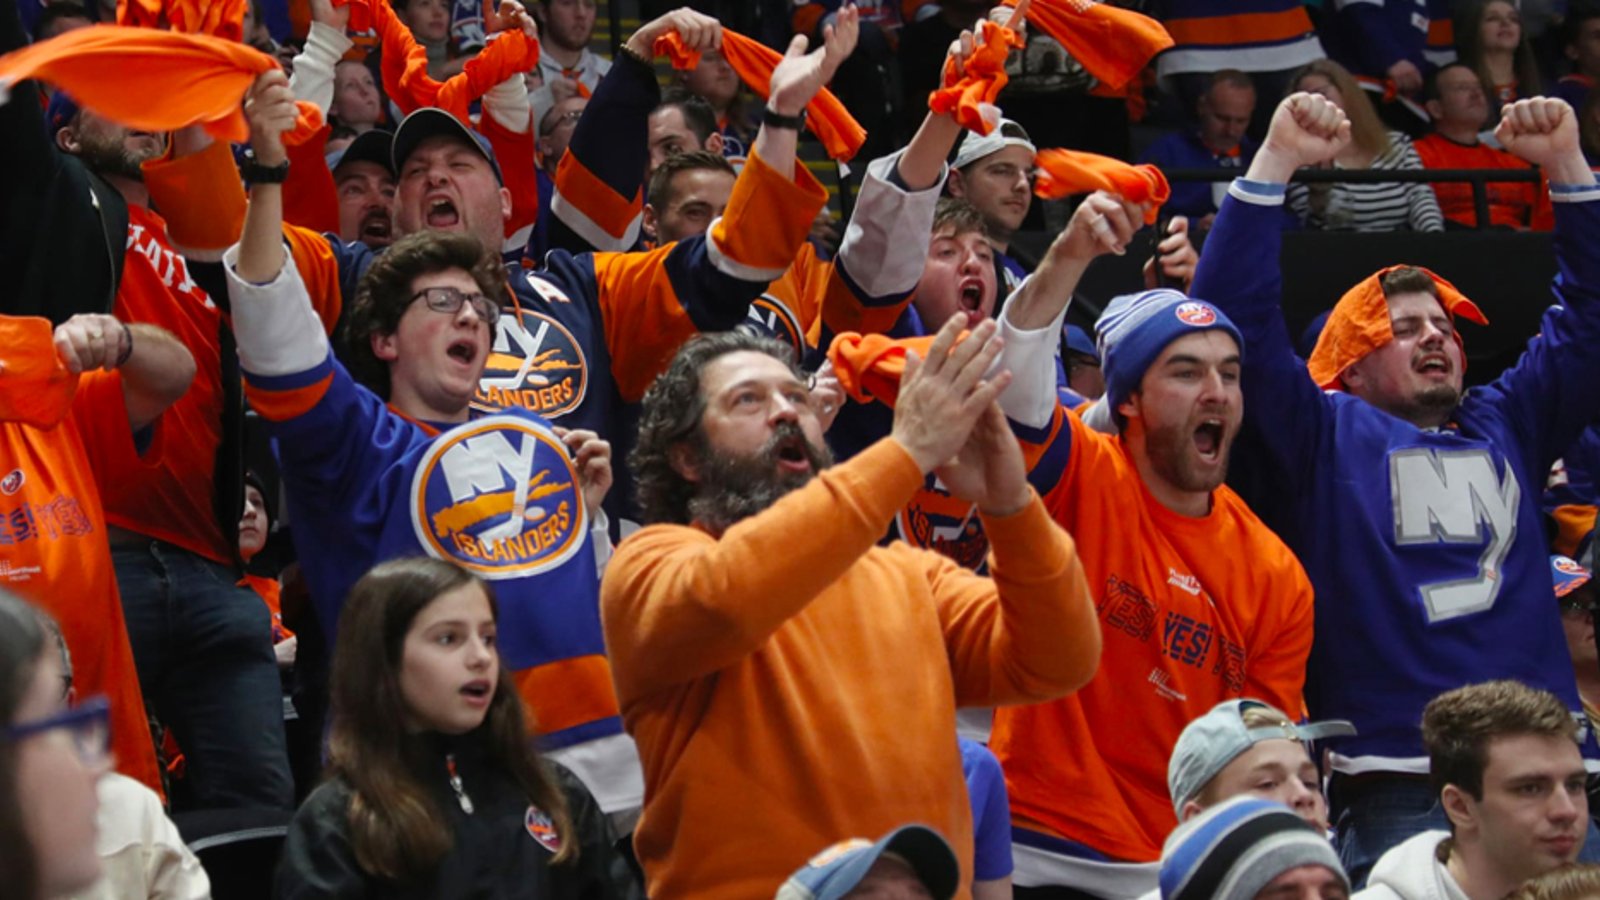 Islander fans raise over $4000 to fly a banner over Toronto that reads “Lets Go Islanders”